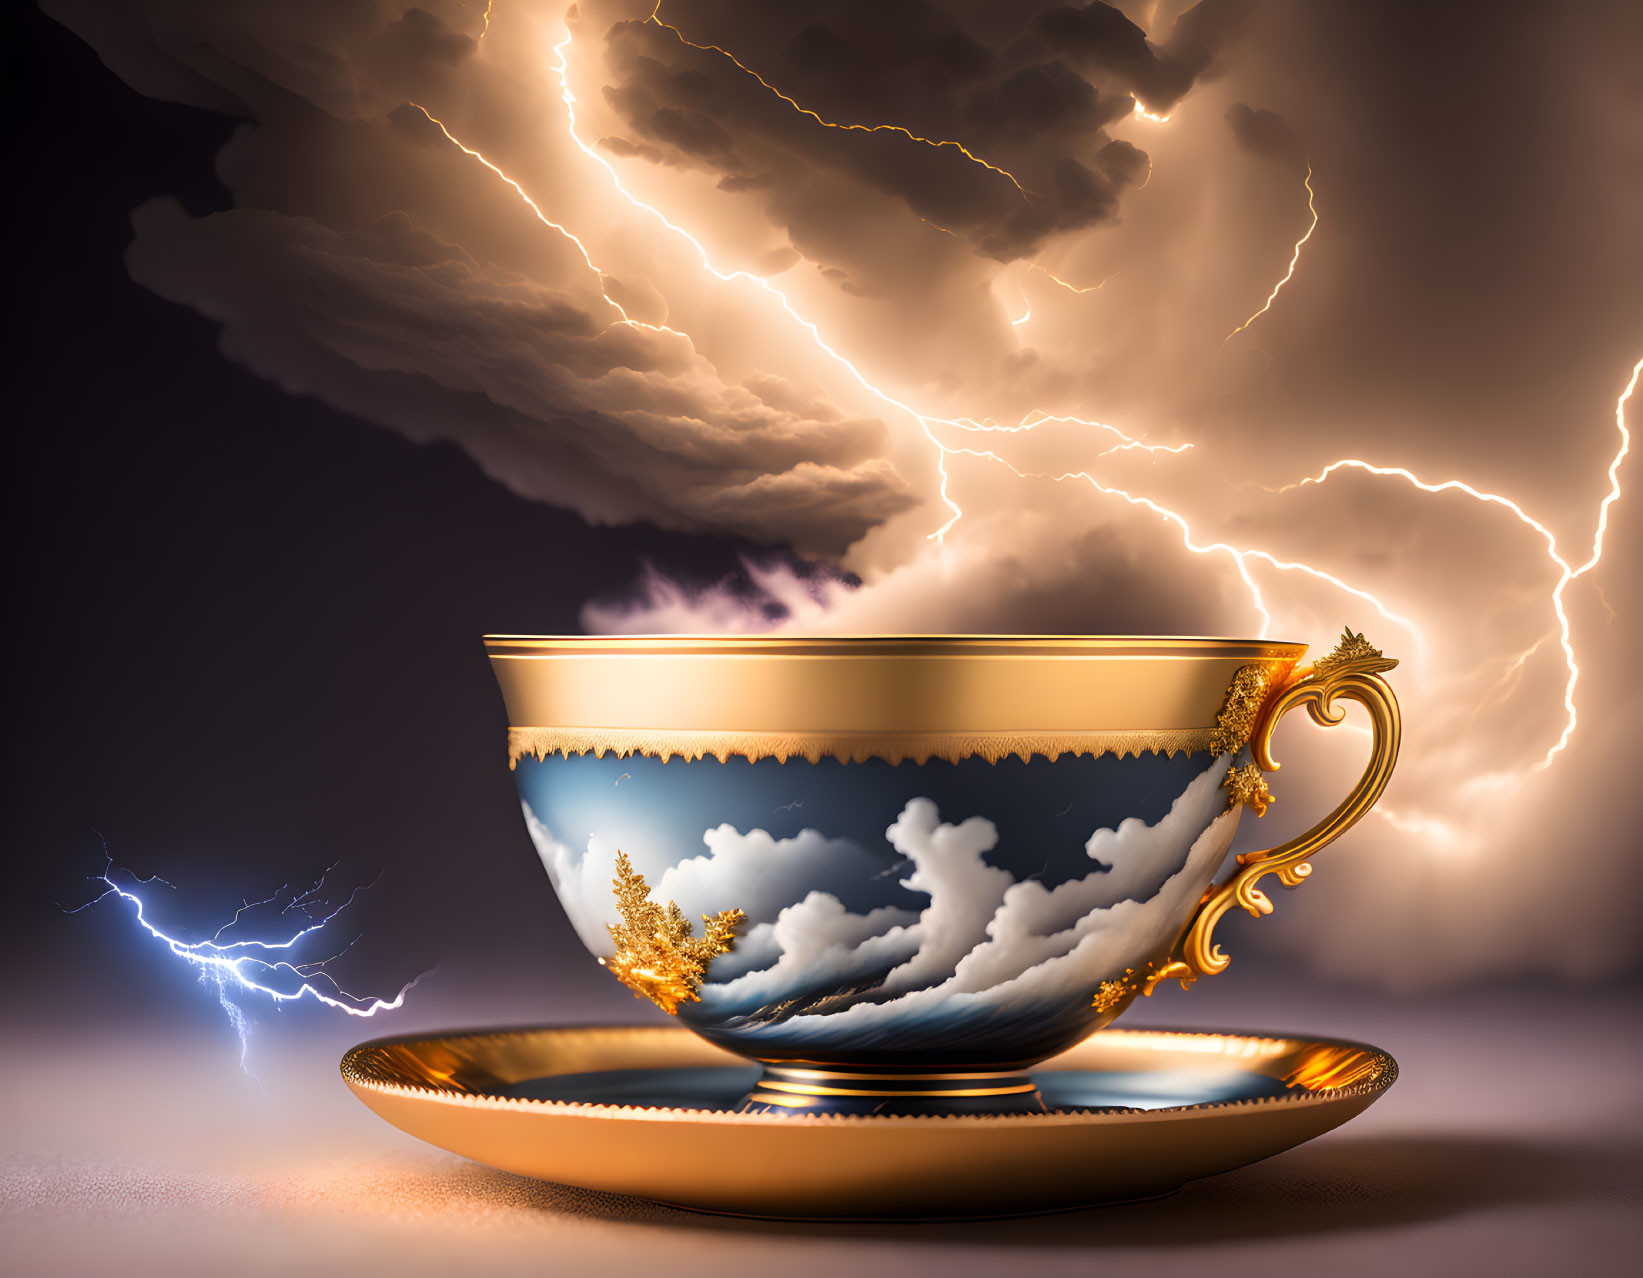 Decorative cup with cloud design against stormy sky and lightning strikes